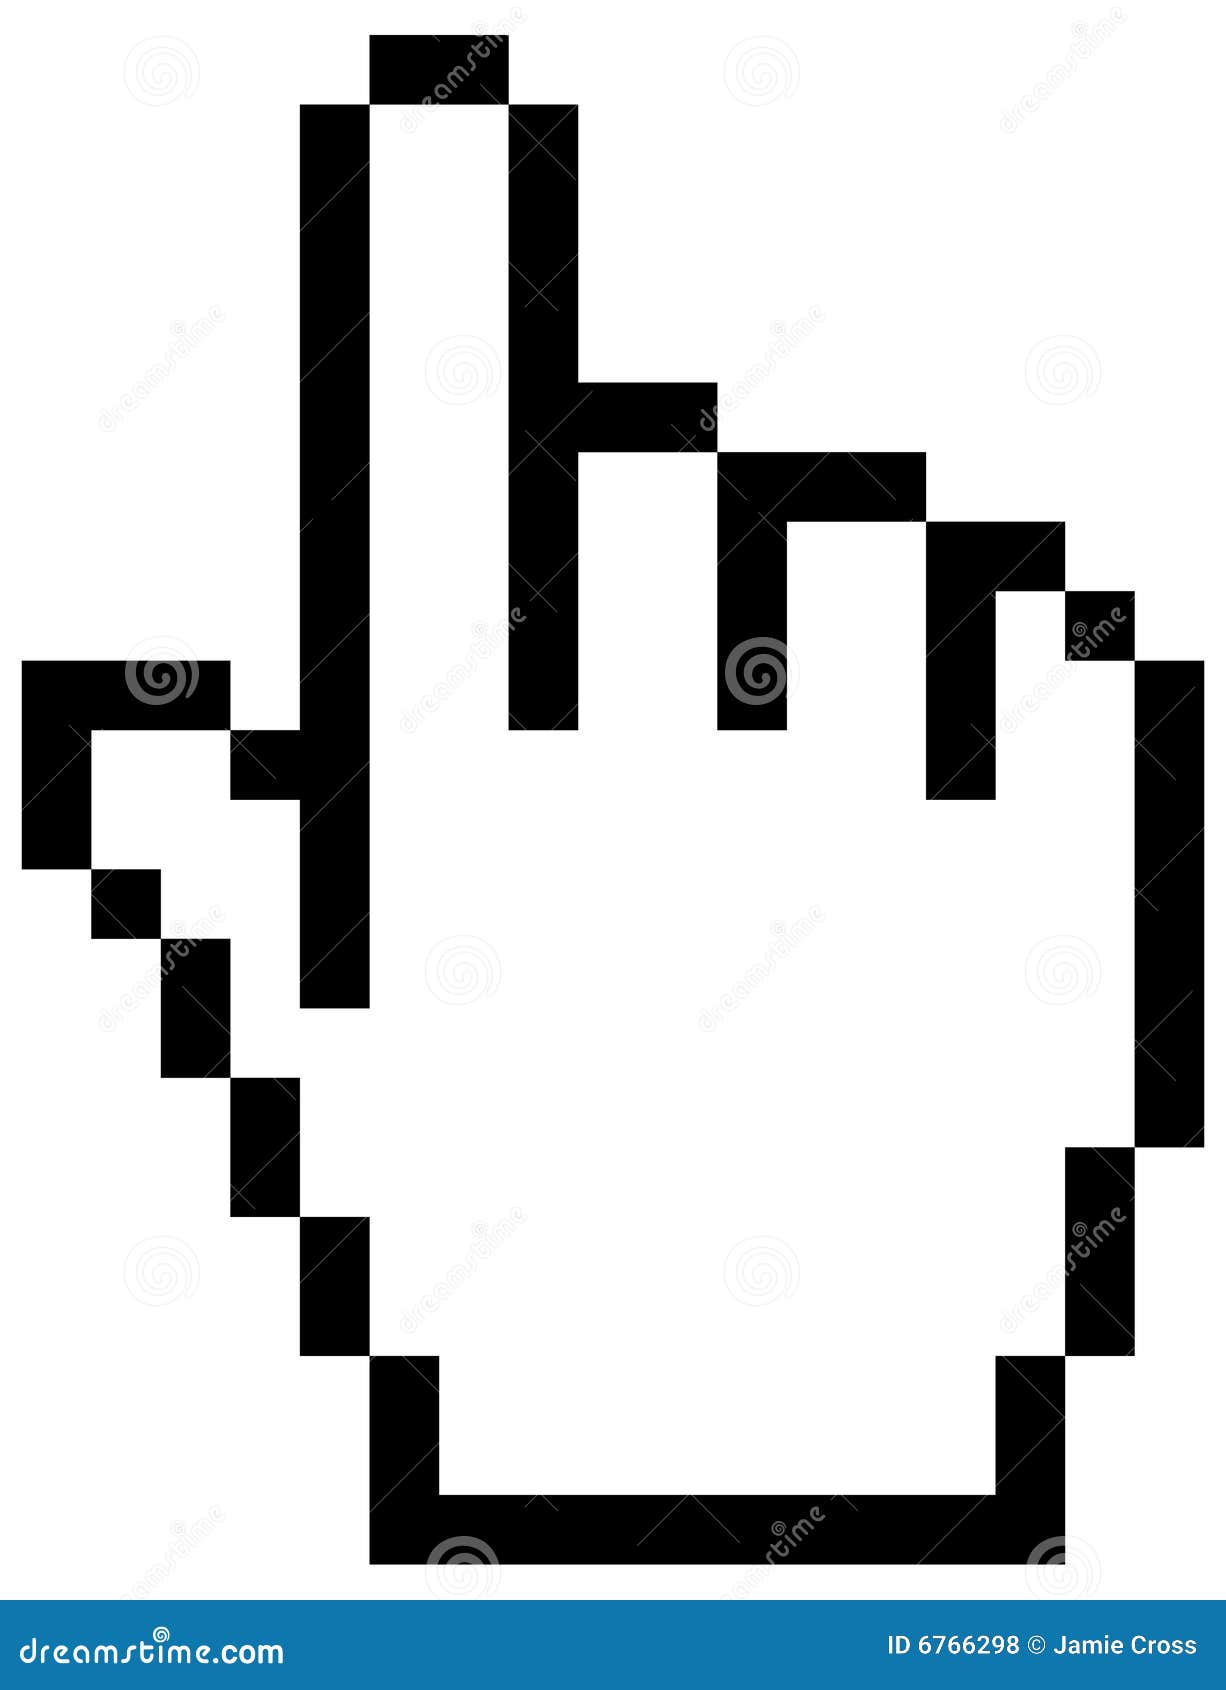 mouse pointer hand